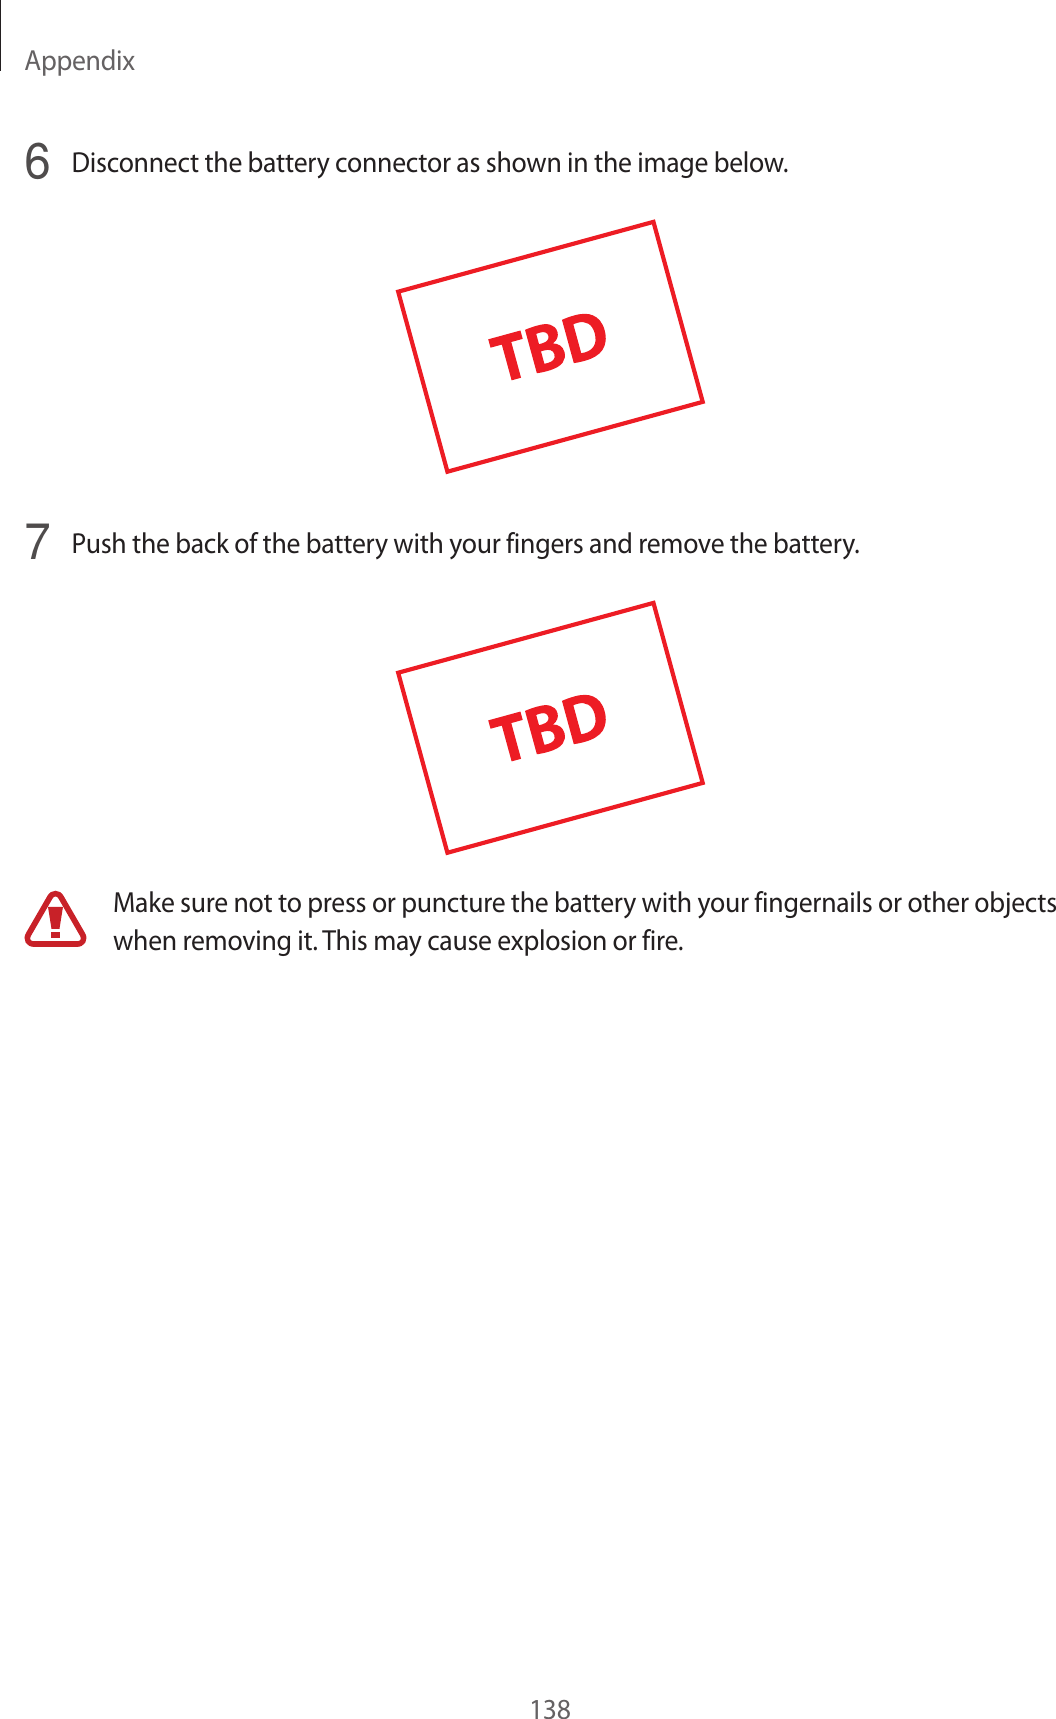 Appendix1386  Disconnect the battery connector as shown in the image below.7  Push the back of the ba ttery with your fingers and remov e the ba ttery.Make sure not to pr ess or puncture the battery with your fingernails or other objects when removing it . T his may cause e xplosion or fir e .